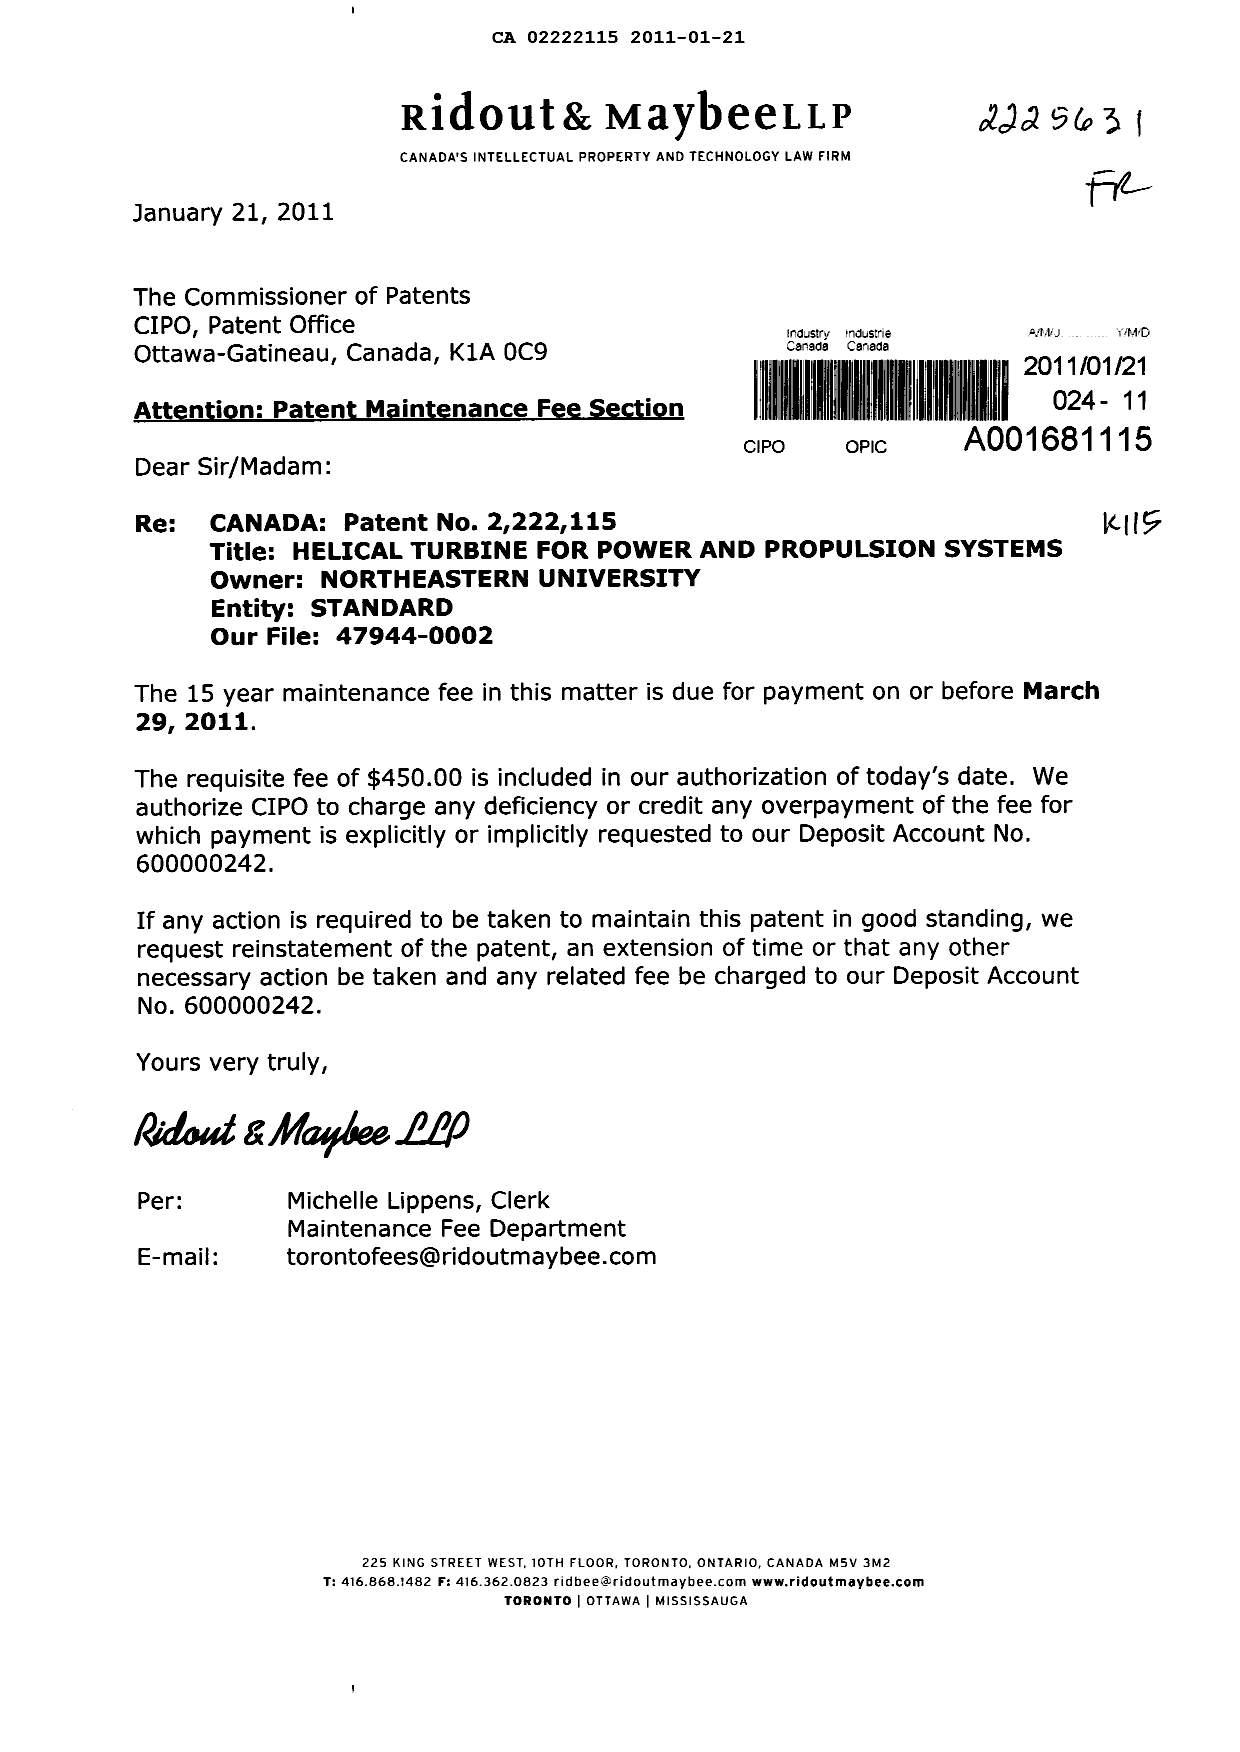 Canadian Patent Document 2222115. Fees 20110121. Image 1 of 1